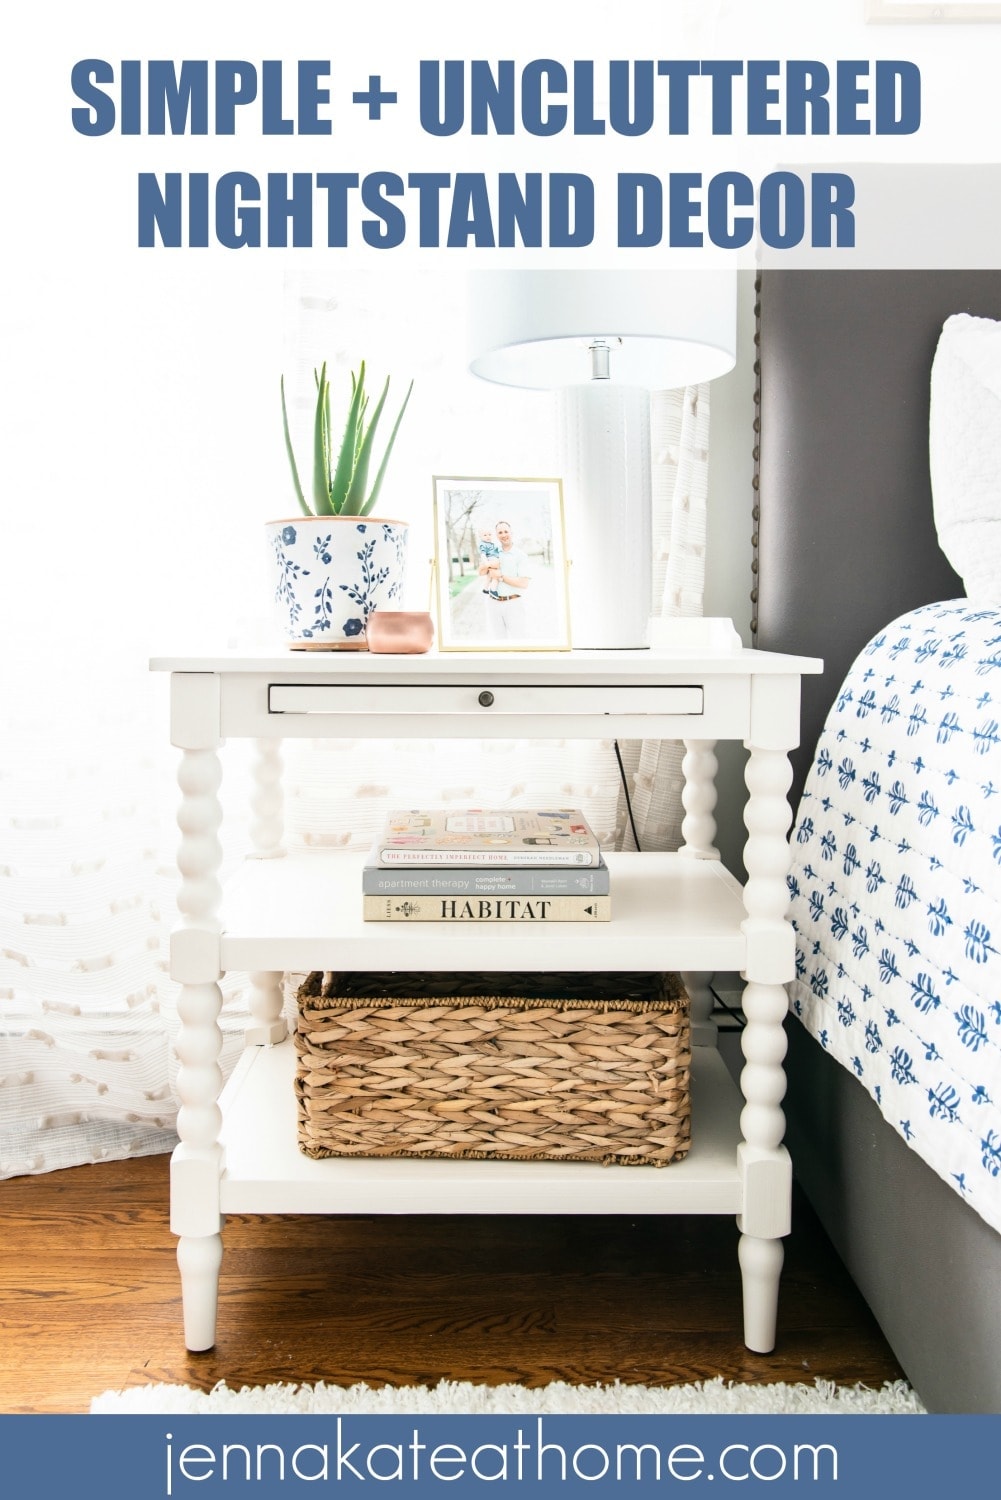 Simple and uncluttered nightstand decor ideas for your bedroom